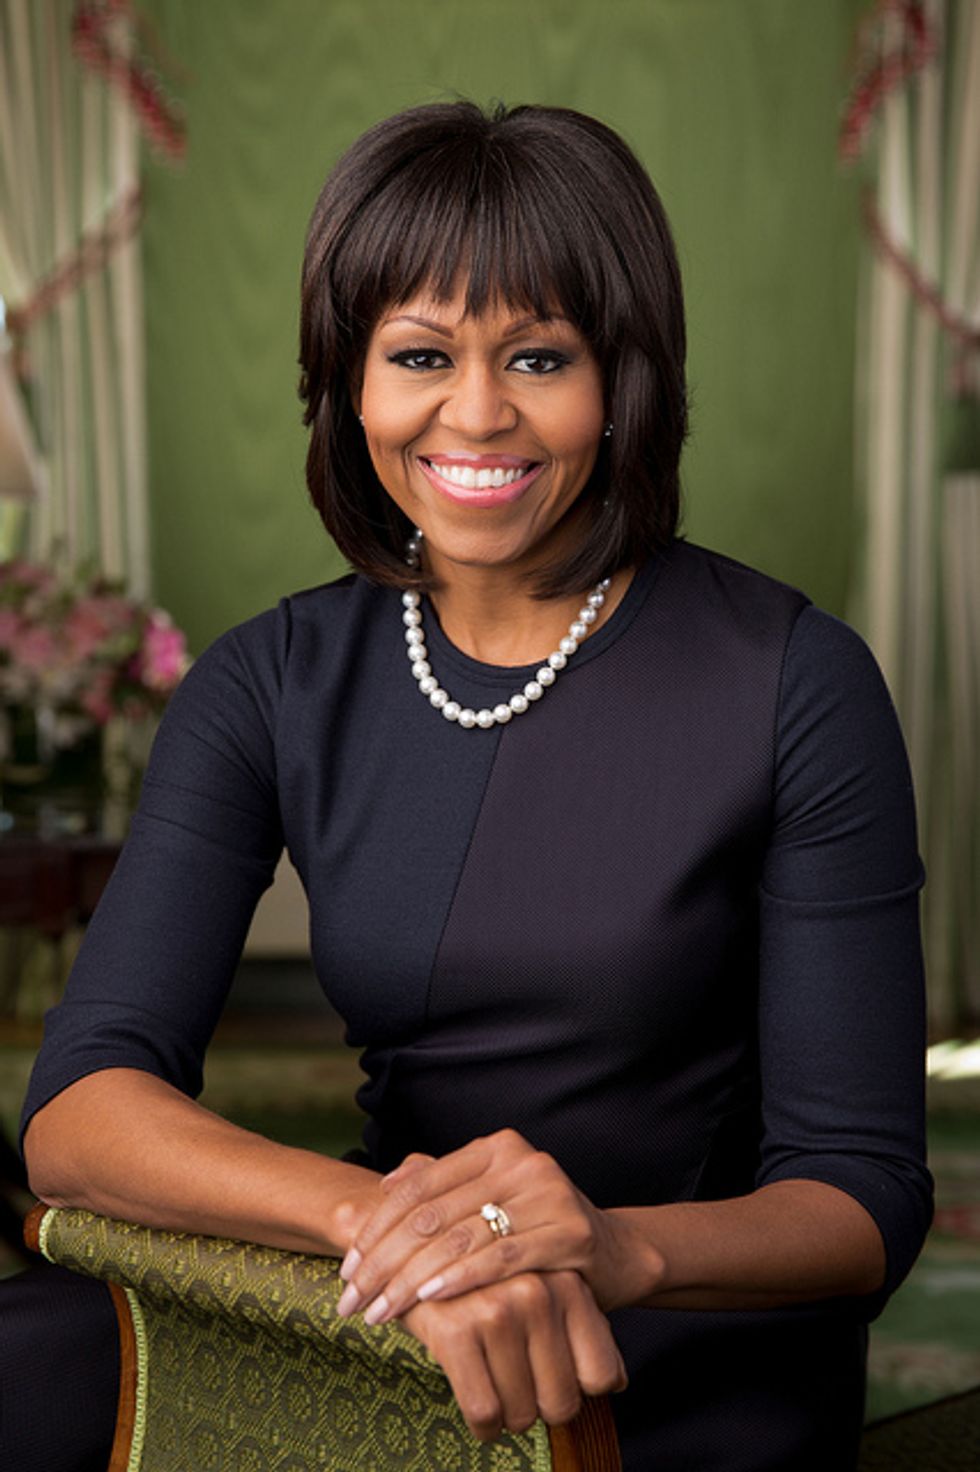 Please Nobody Tell The Yahoo! Commenters About Michelle Obama's New Portrait